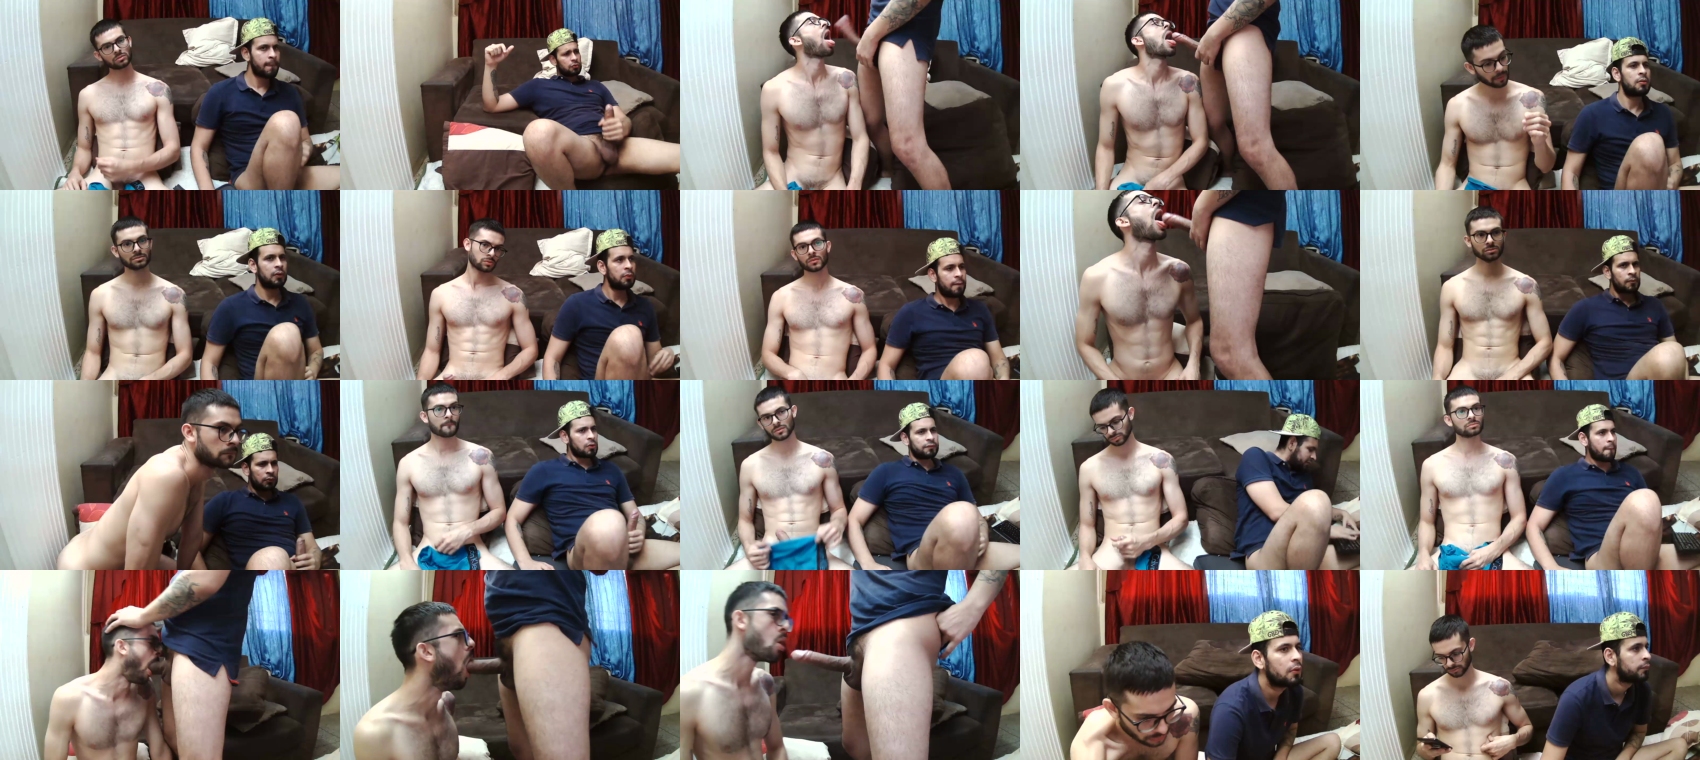 carlosfavier  16-02-2022 Recorded Video squirt